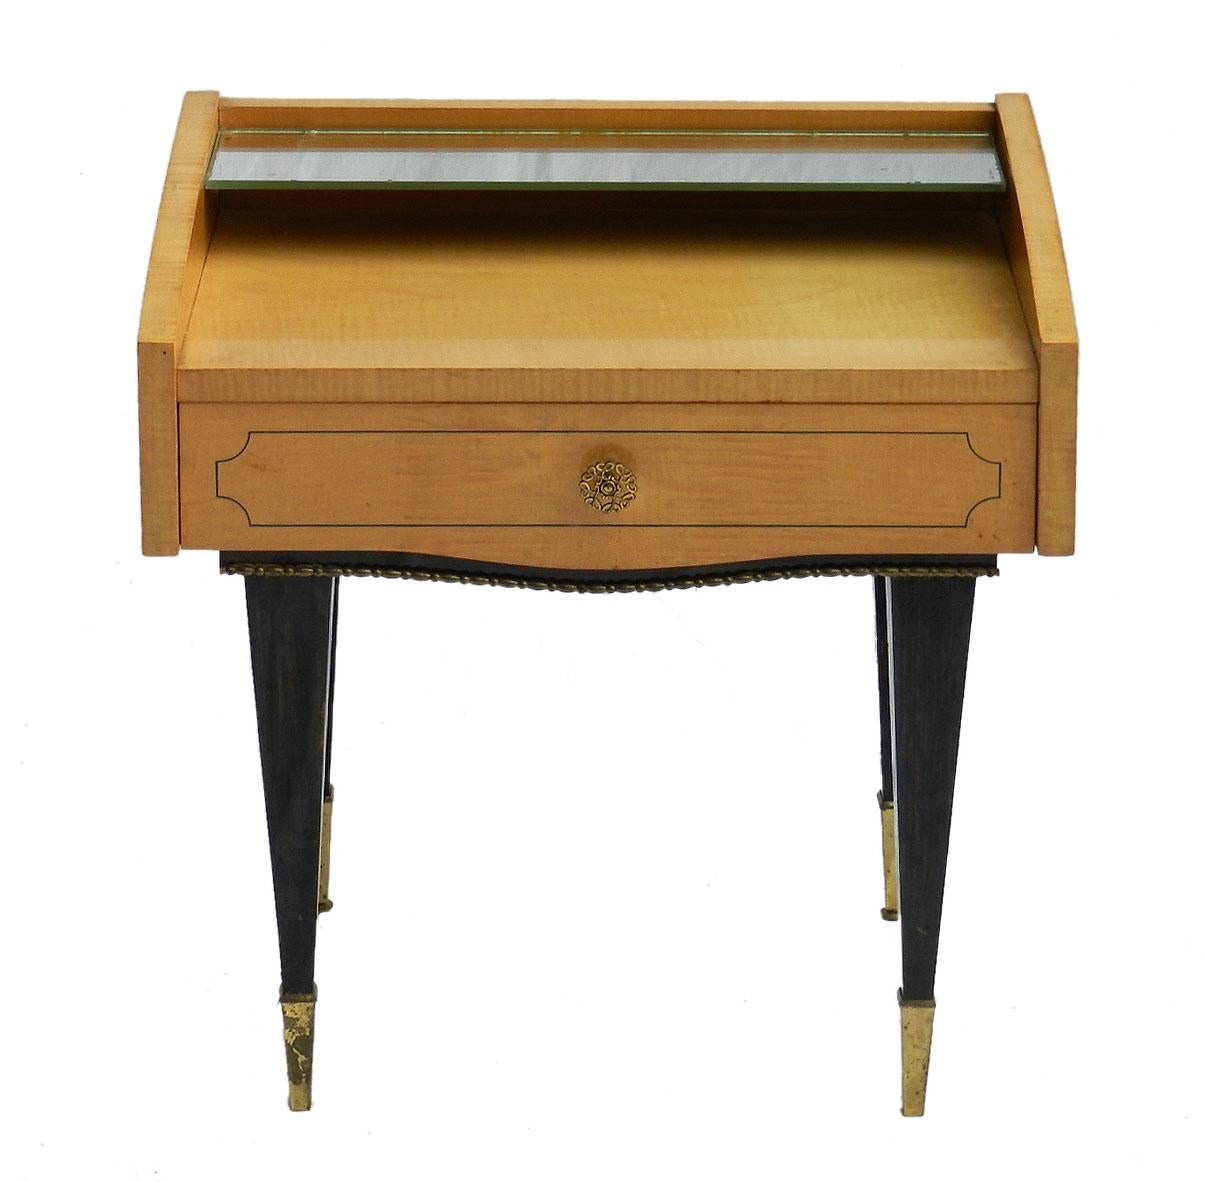 Midcentury side cabinet nightstand bedside table
Lacquered wood with inlay
Single drawer
Mirror shelf
Metal feet
Good vintage condition for its age with only minor marks of use, metal foot slightly tarnished, mirror has signs of wear.


  